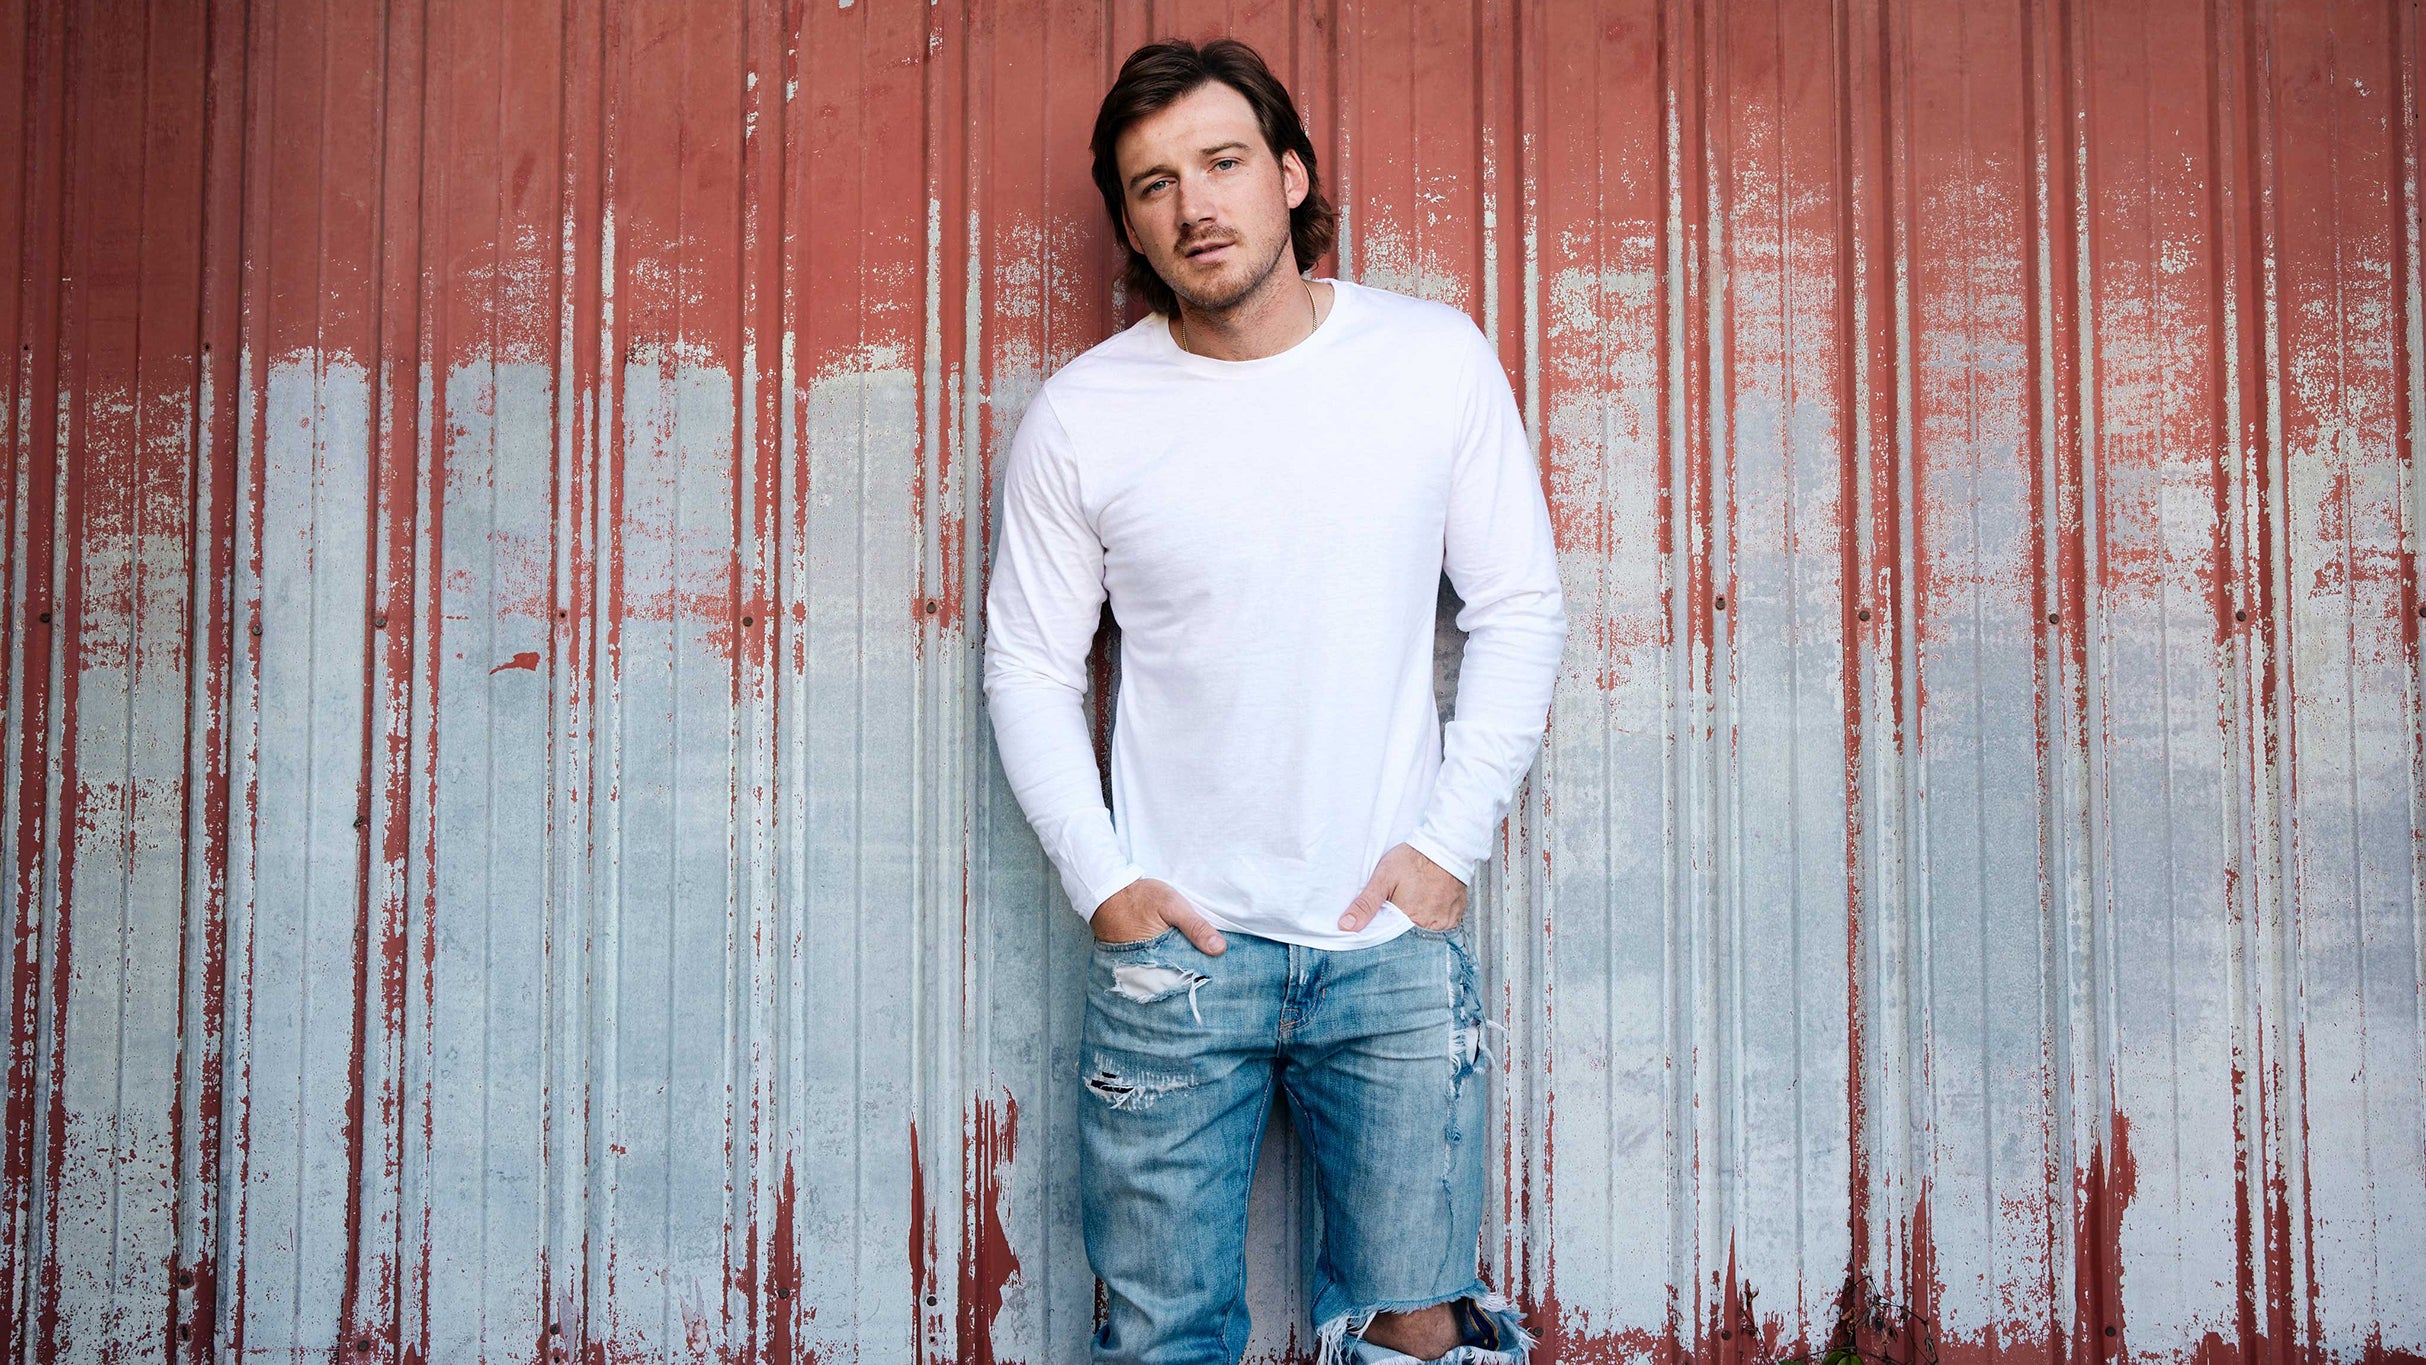 Morgan Wallen: One Night At A Time World Tour in Washington promo photo for ERNEST Fan Club presale offer code